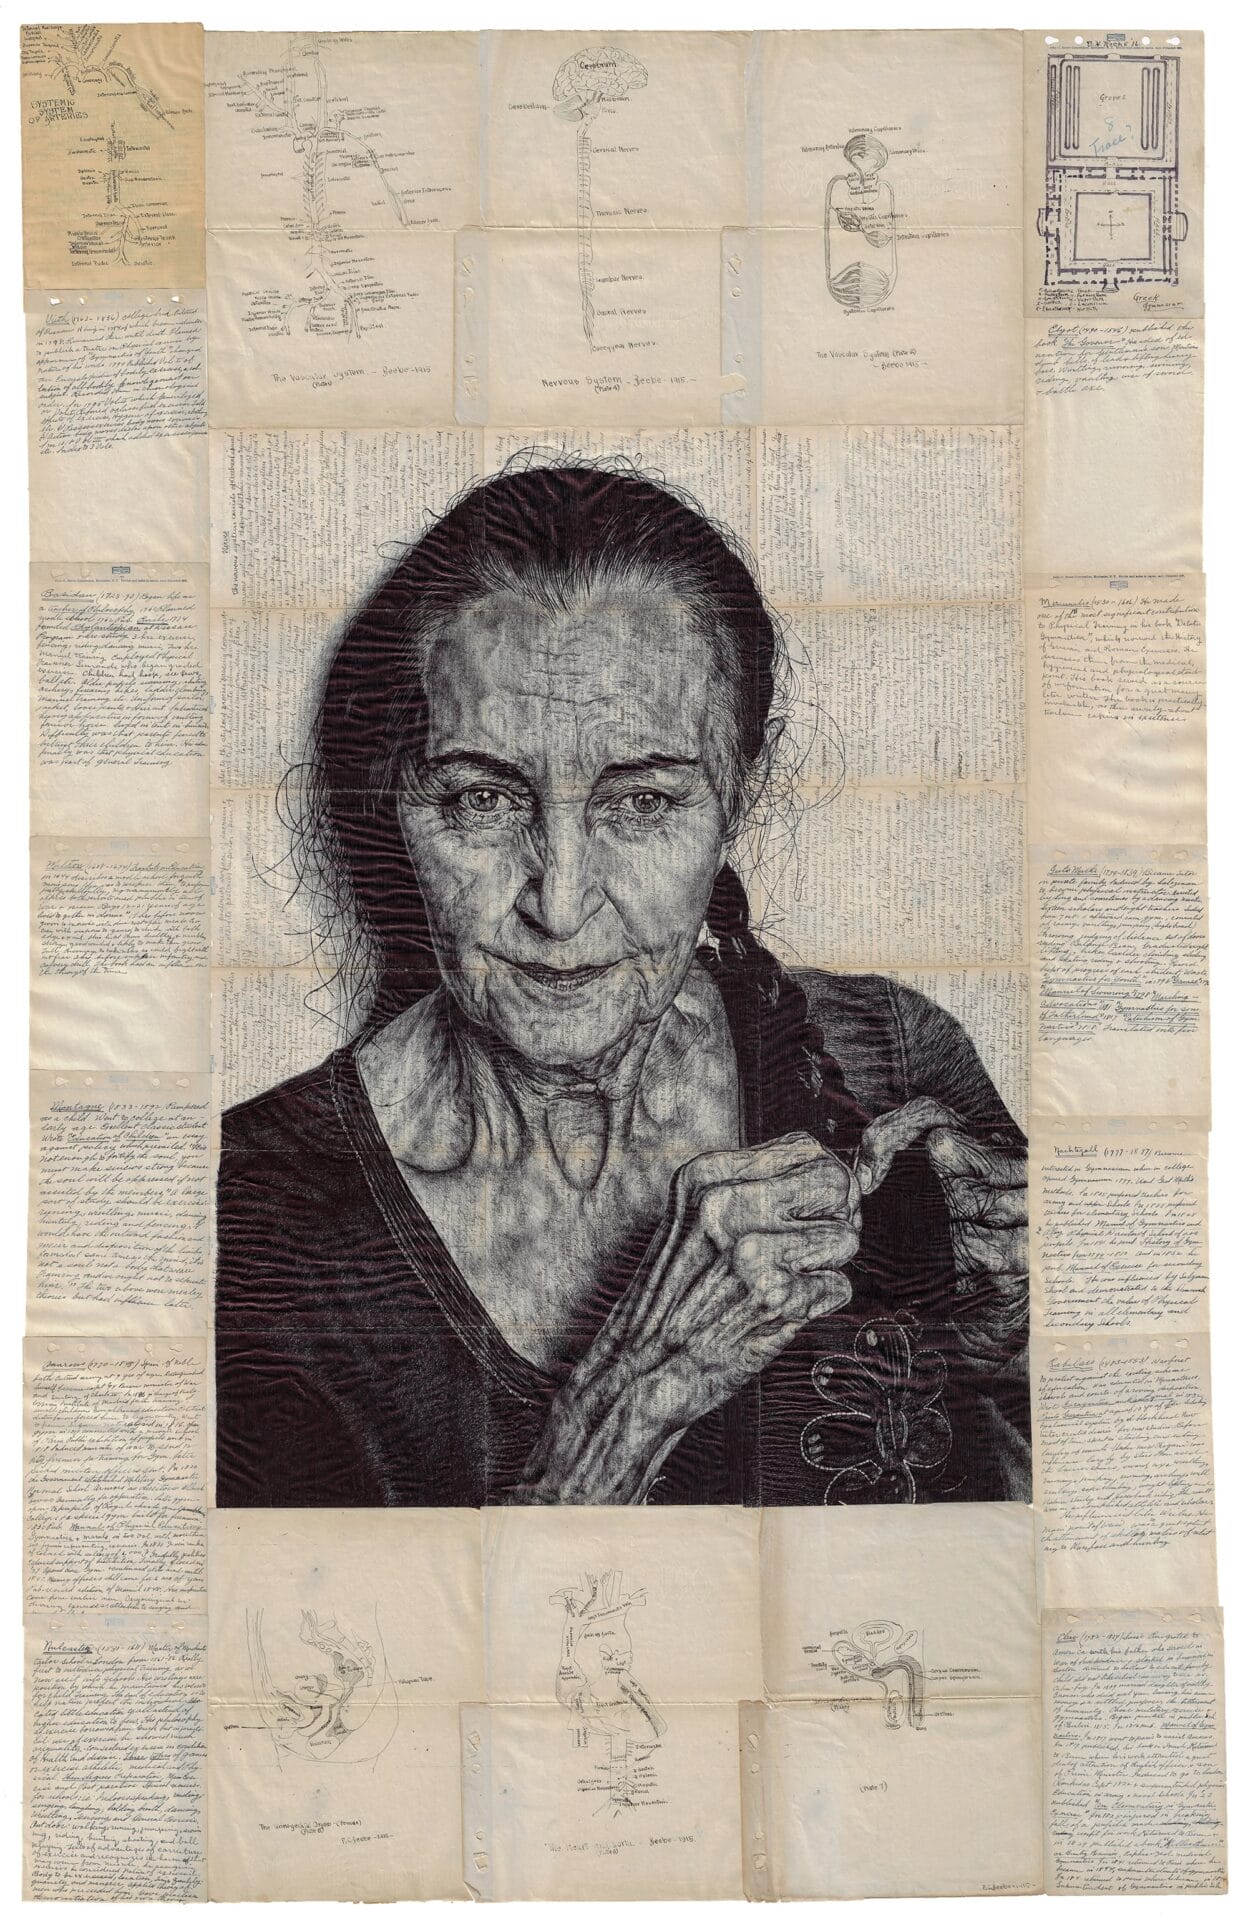 Mark Powell’s Pen Drawings Accentuate the Memories Etched into Faces and Ephemera